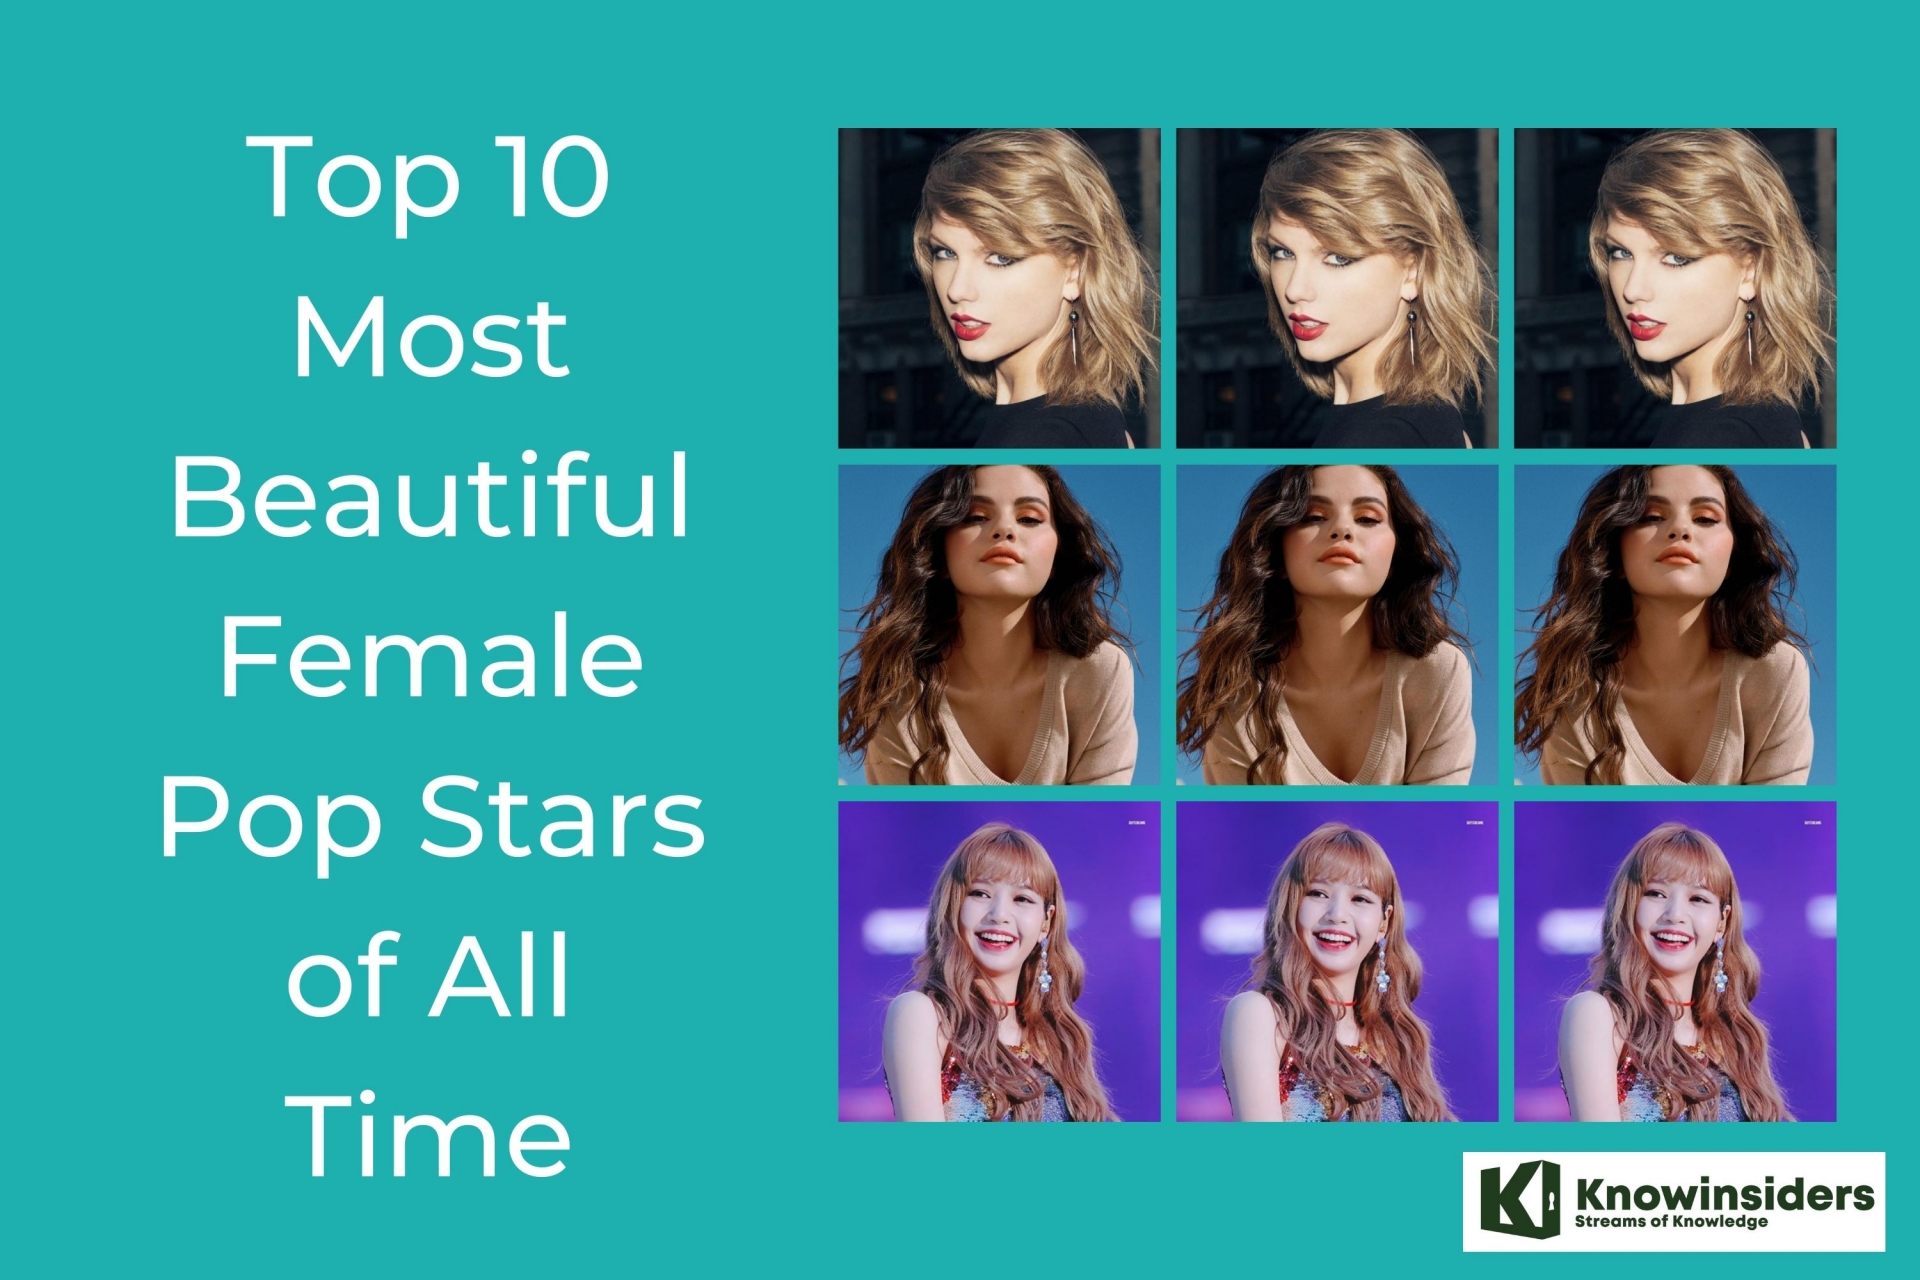 Top 10 World's Most Beautiful Female Pop Stars of All Time